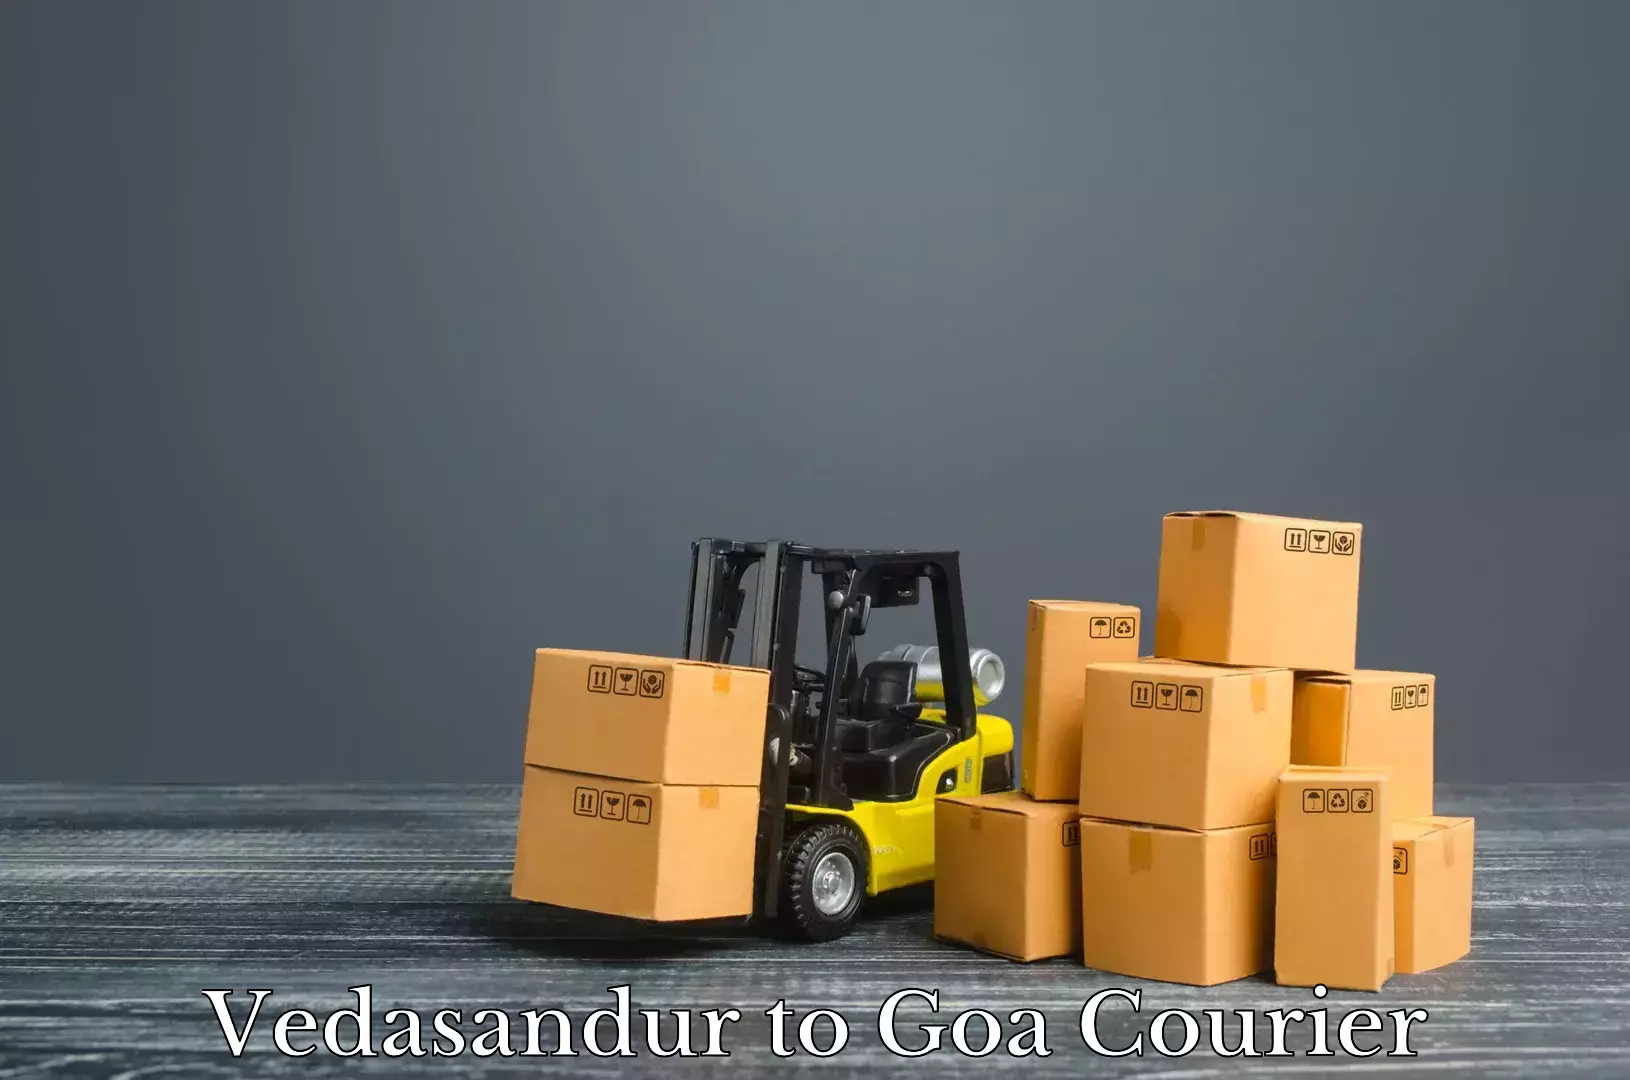 Baggage shipping experts Vedasandur to South Goa